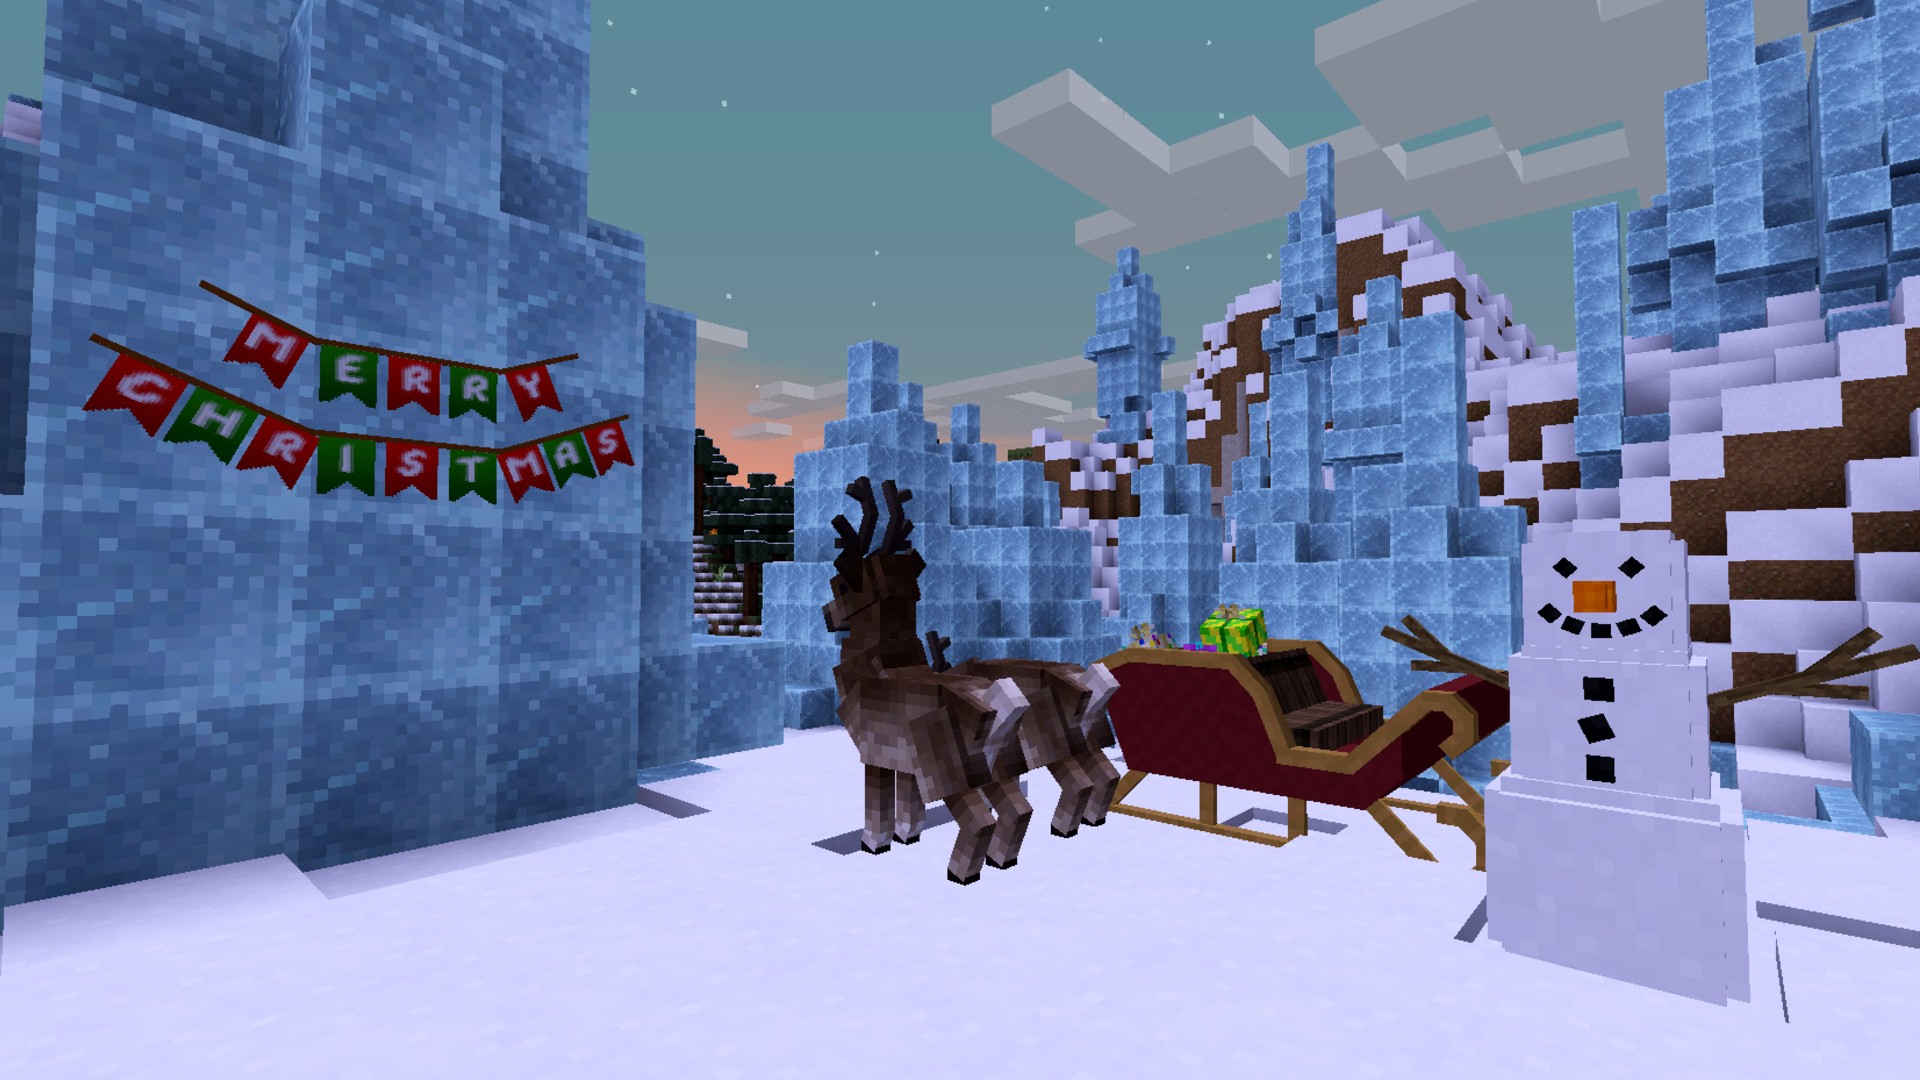 The best Minecraft Christmas builds, seeds, skins, and more